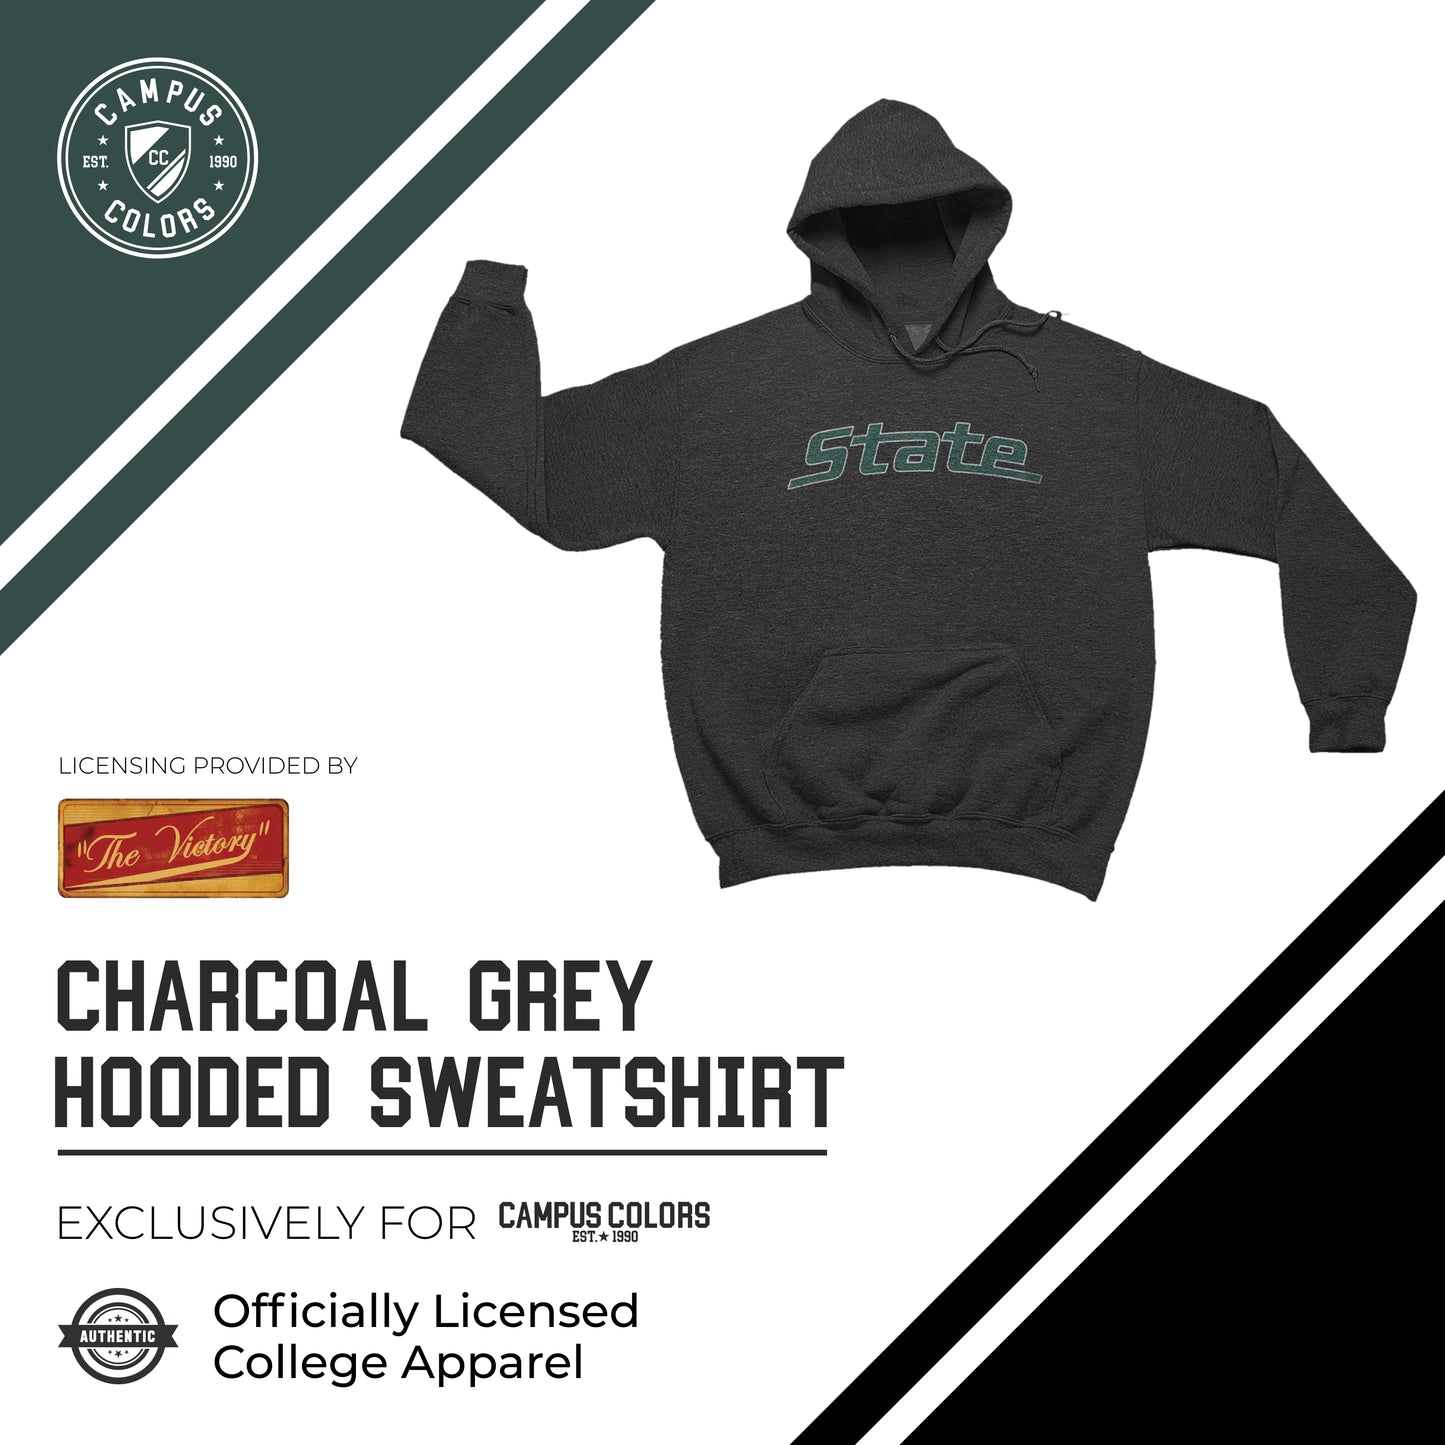 Michigan State Spartans NCAA Adult Cotton Blend Charcoal Hooded Sweatshirt - Charcoal